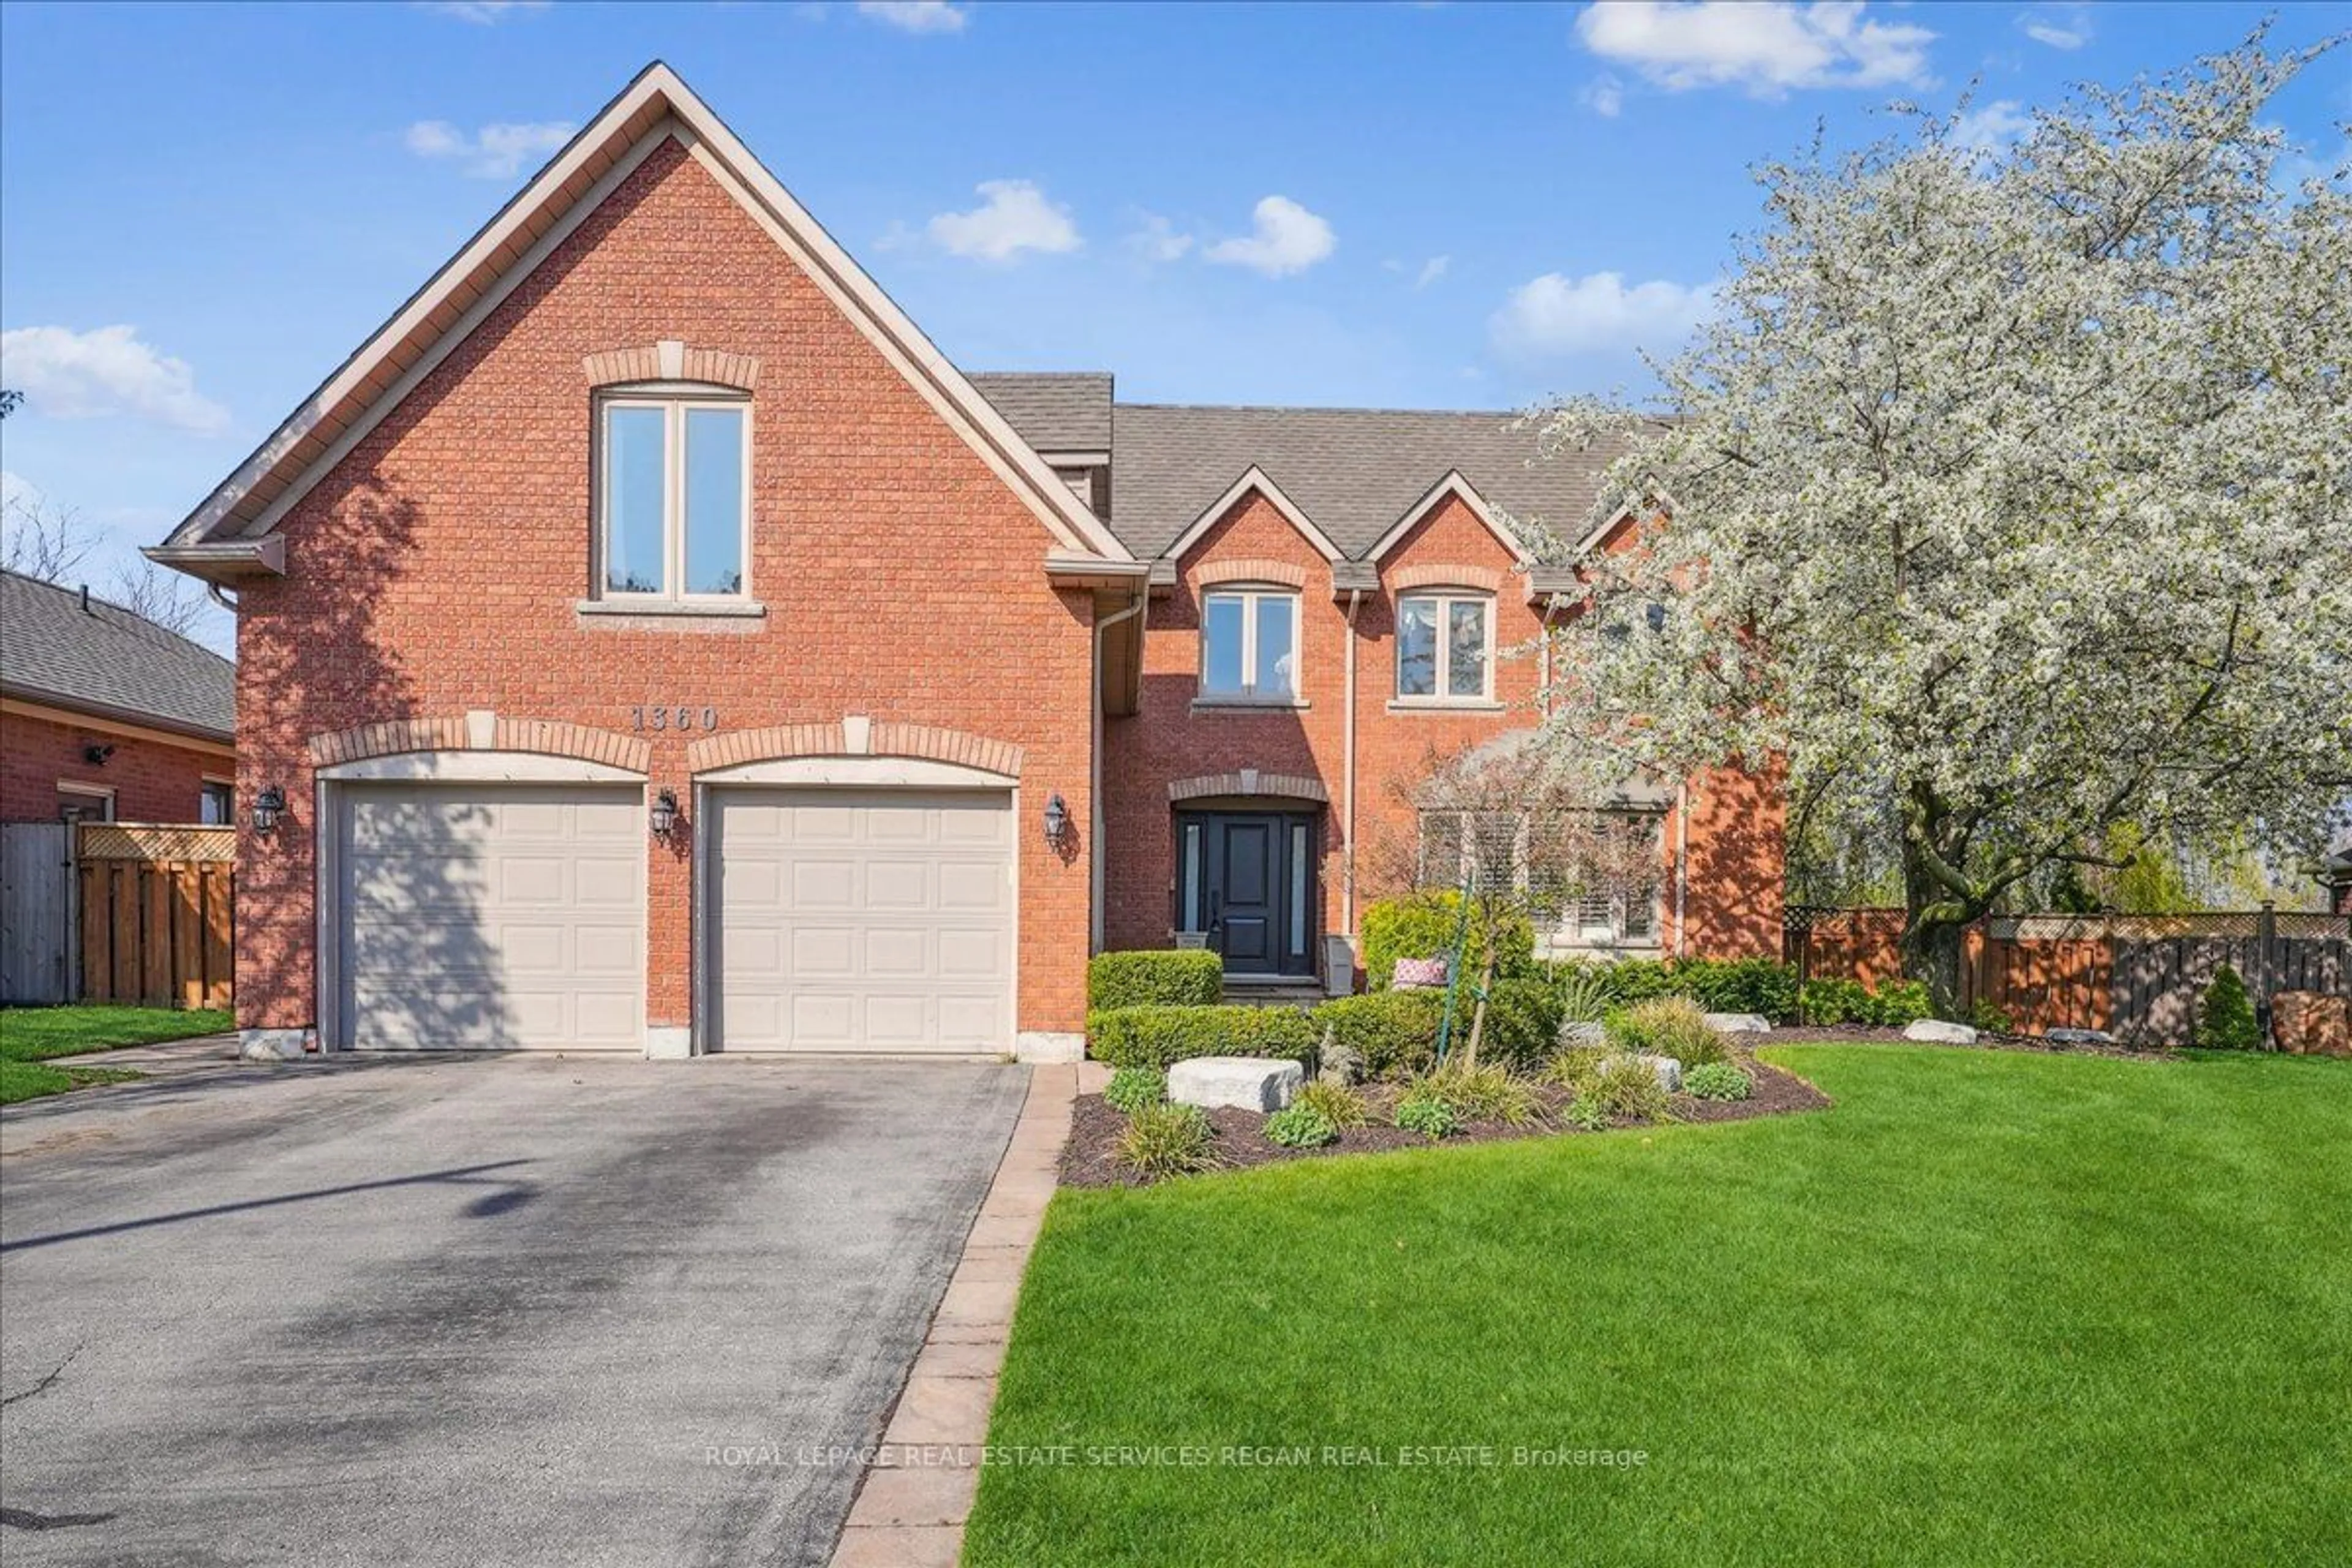 Home with brick exterior material for 1360 Winterberry Dr, Burlington Ontario L7P 4T8